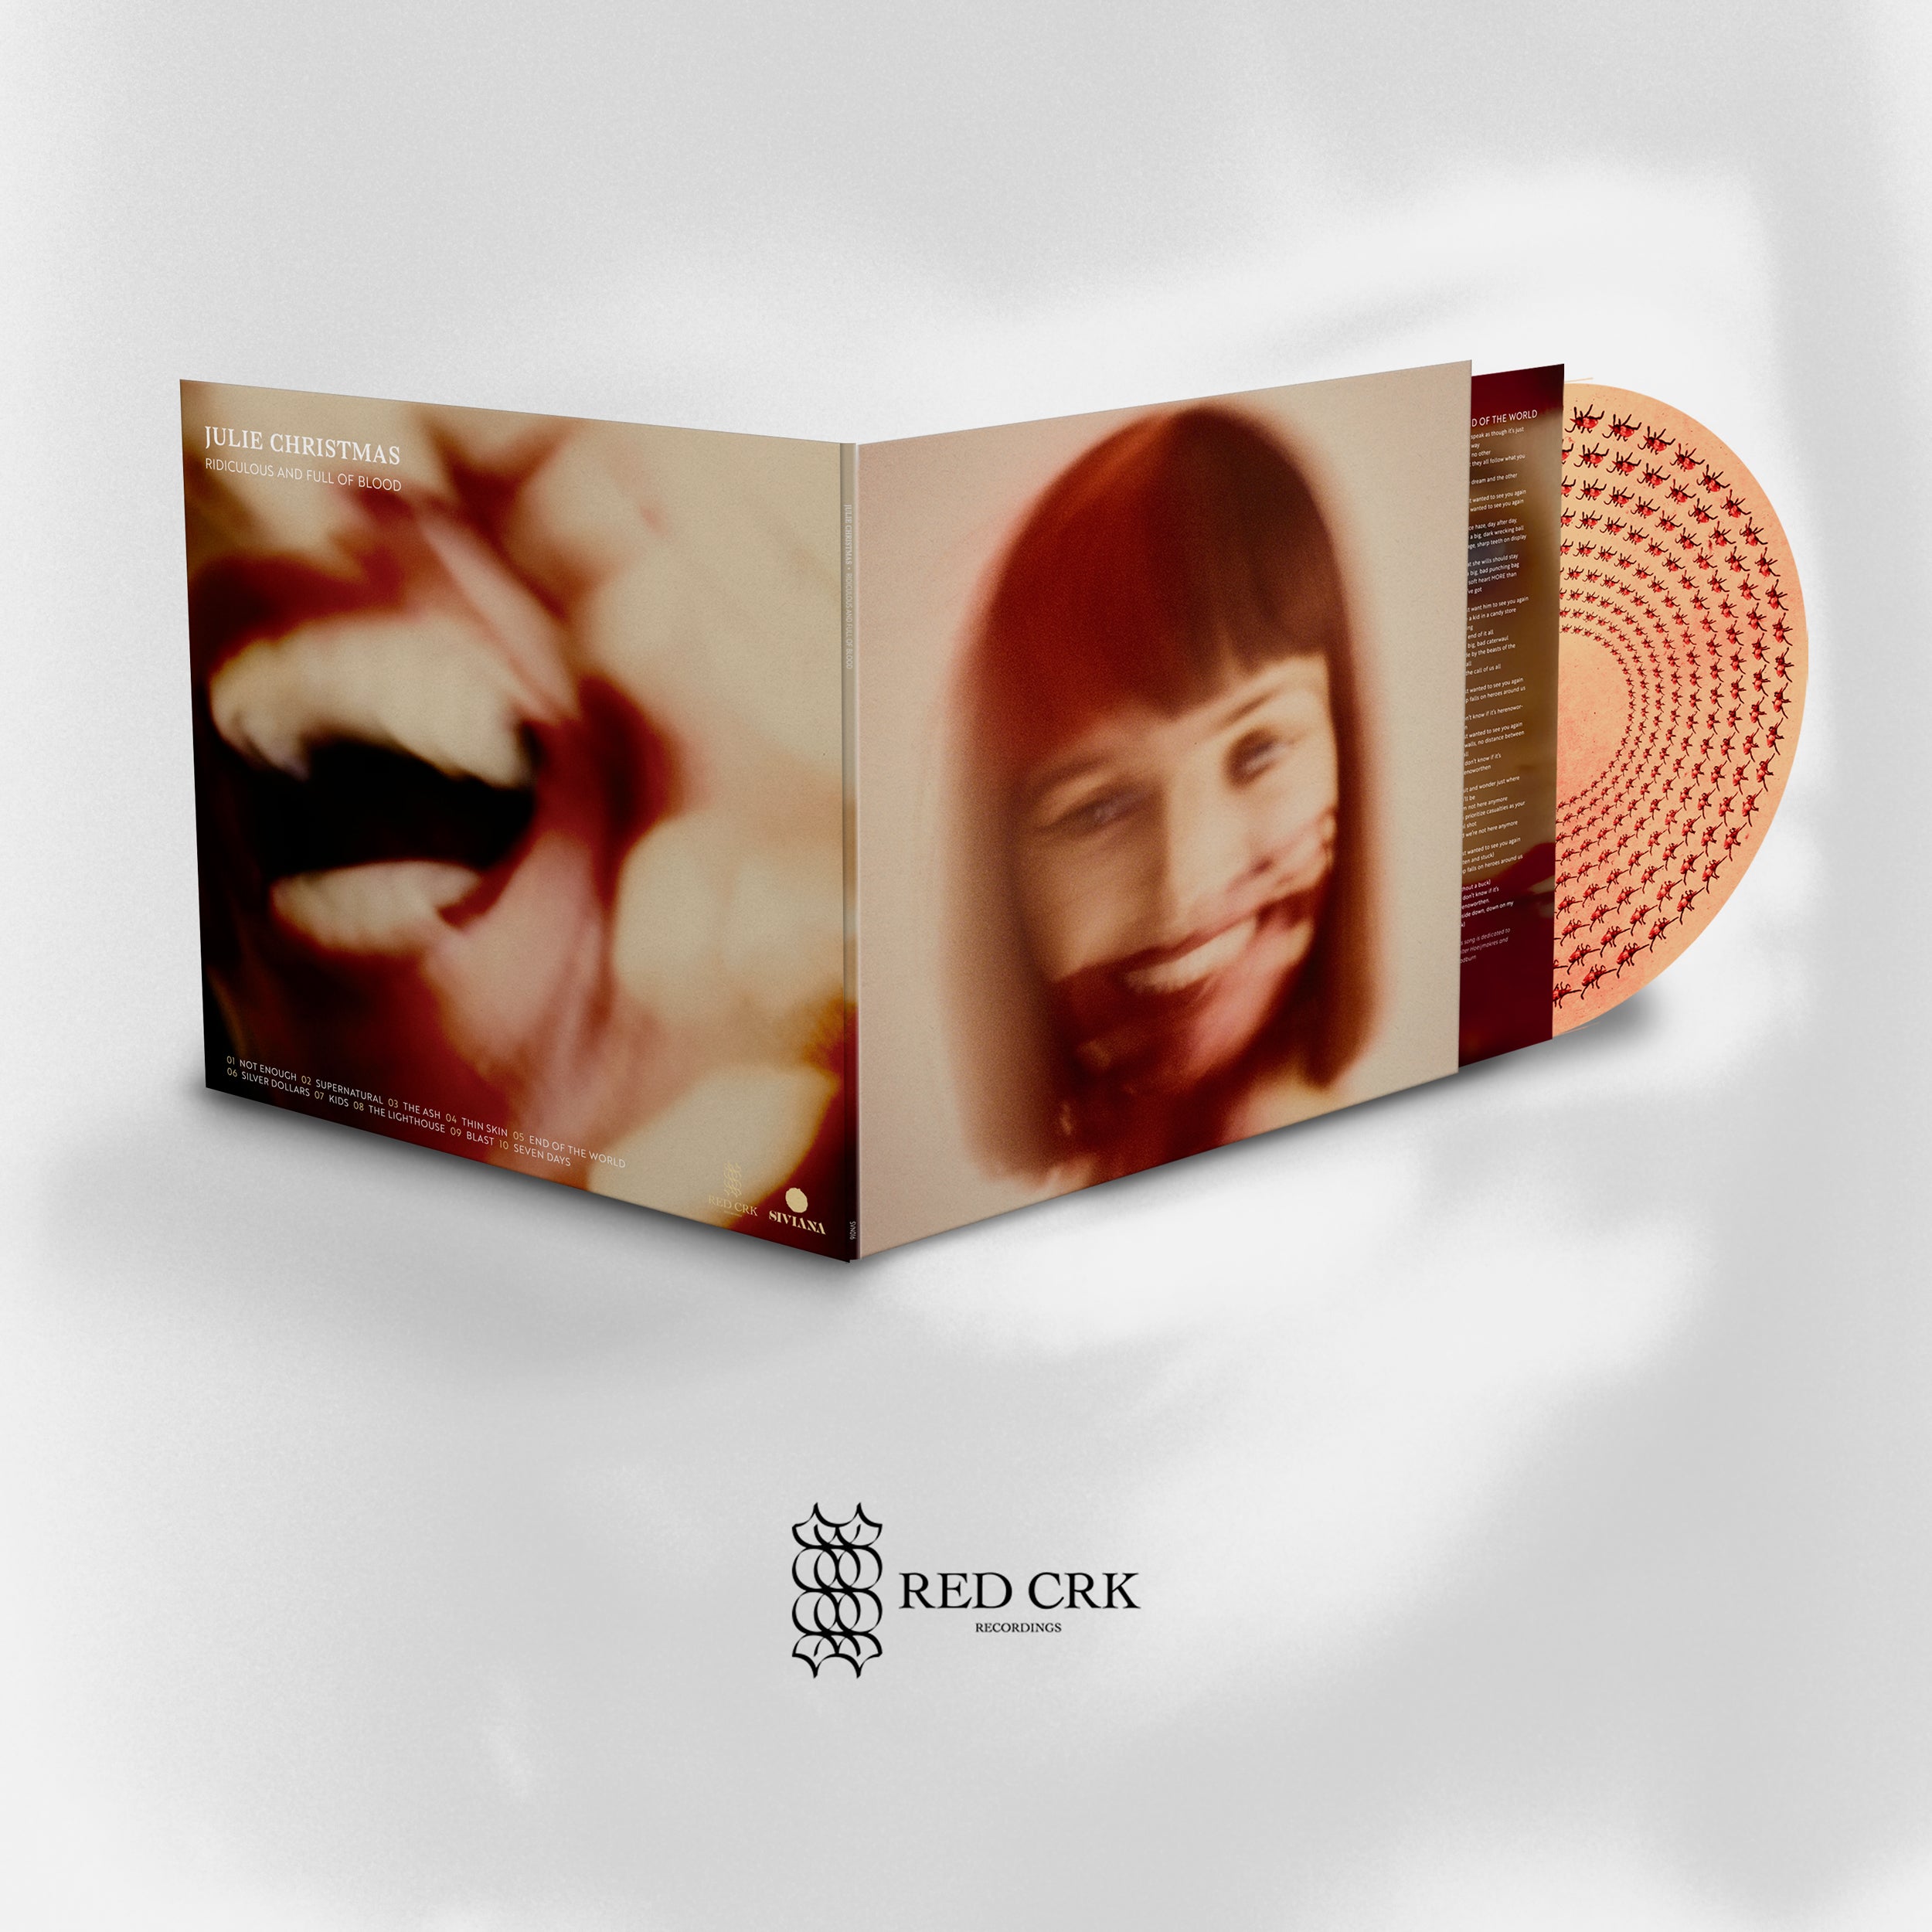 JULIE CHRISTMAS - Ridiculous And Full Of Blood Animated Picture Disc LP LTD TO 500 COPIES (Pre-Order)